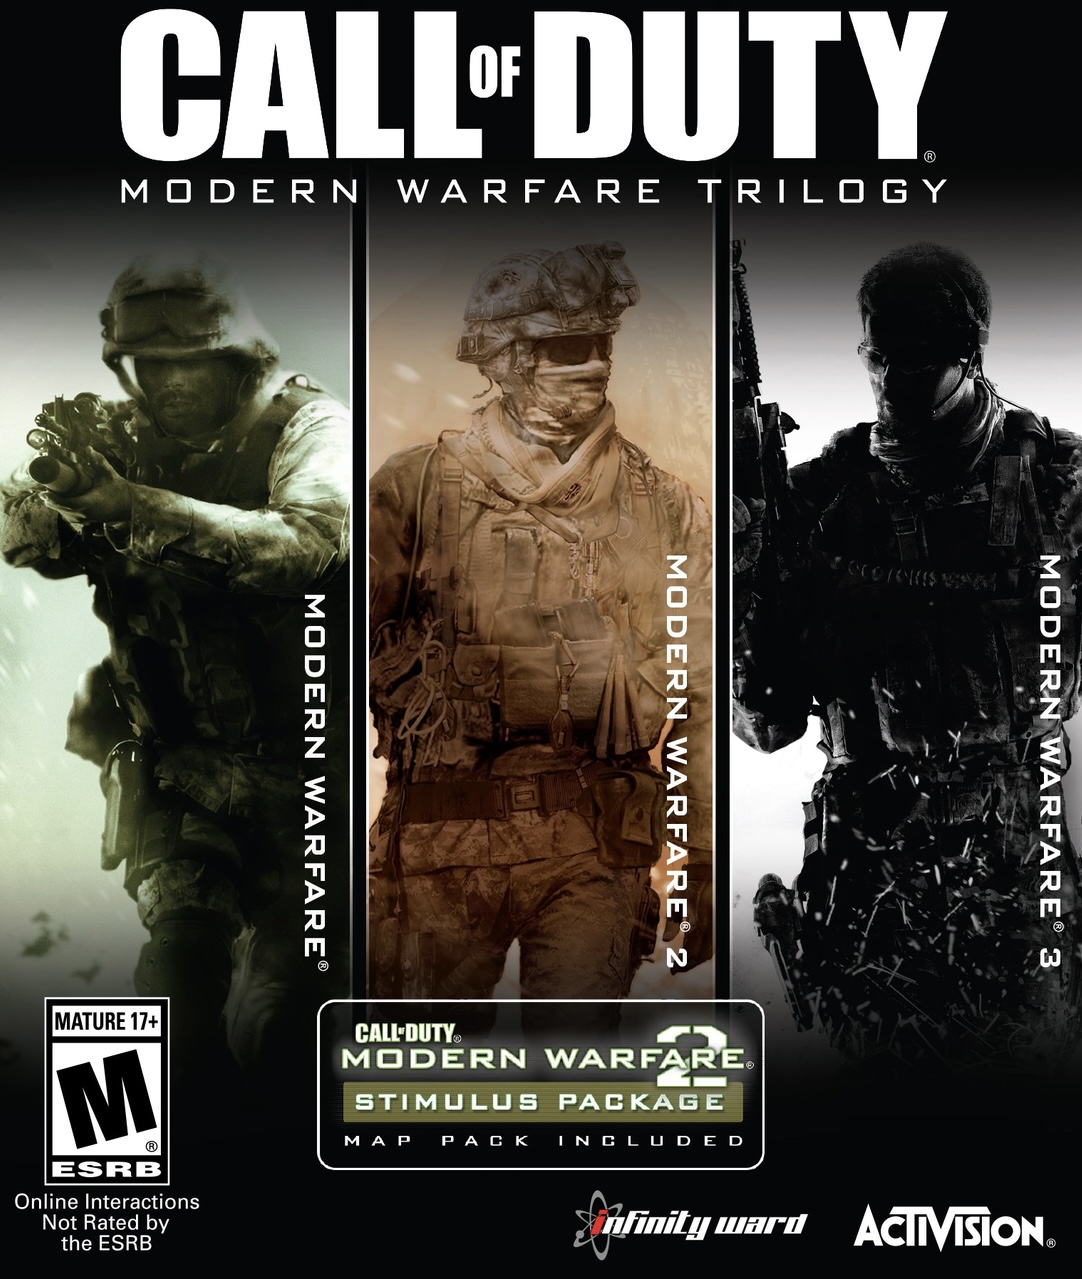 Call of Duty (video game) - Wikipedia